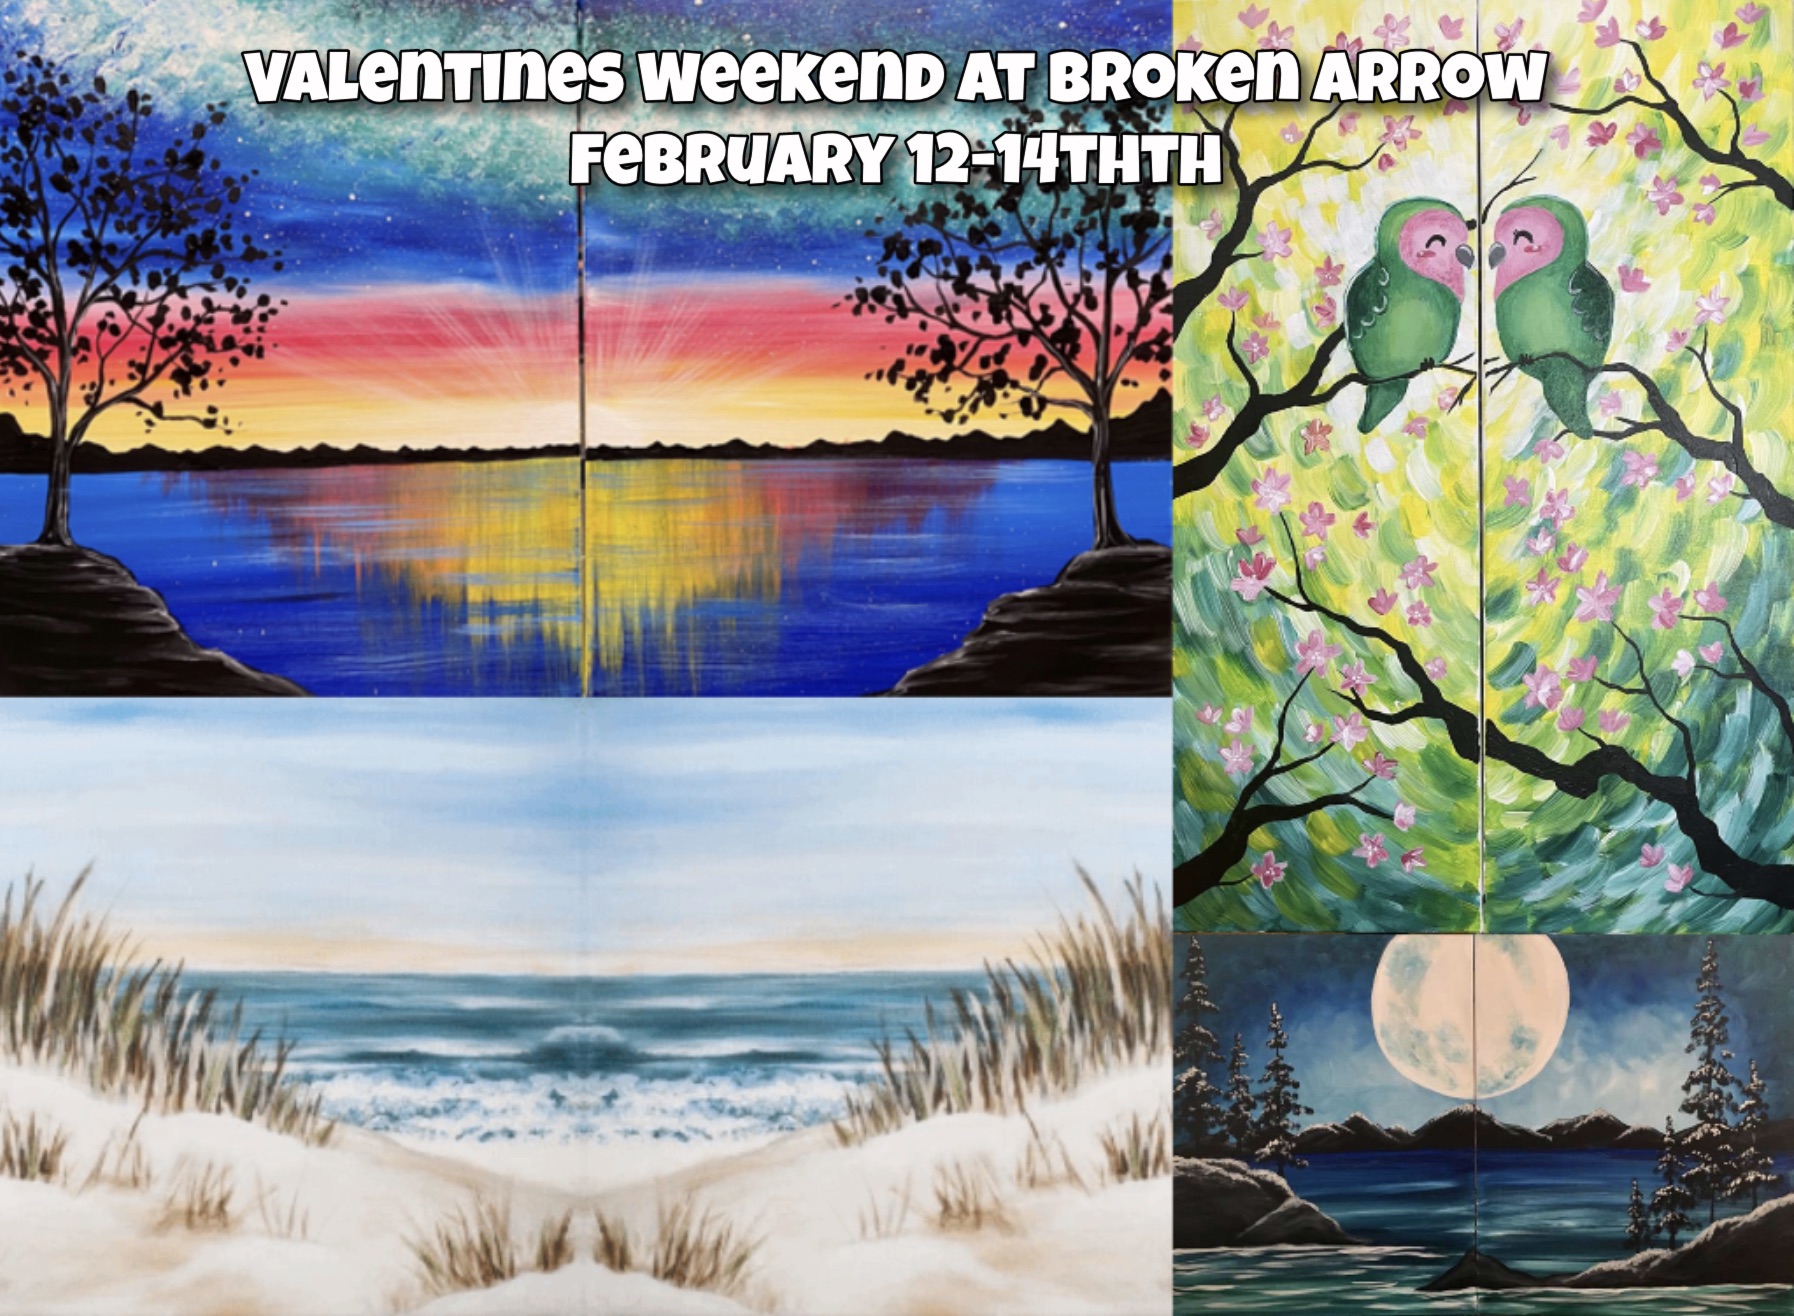 Date Night for Valentine's Day at Broken Arrow